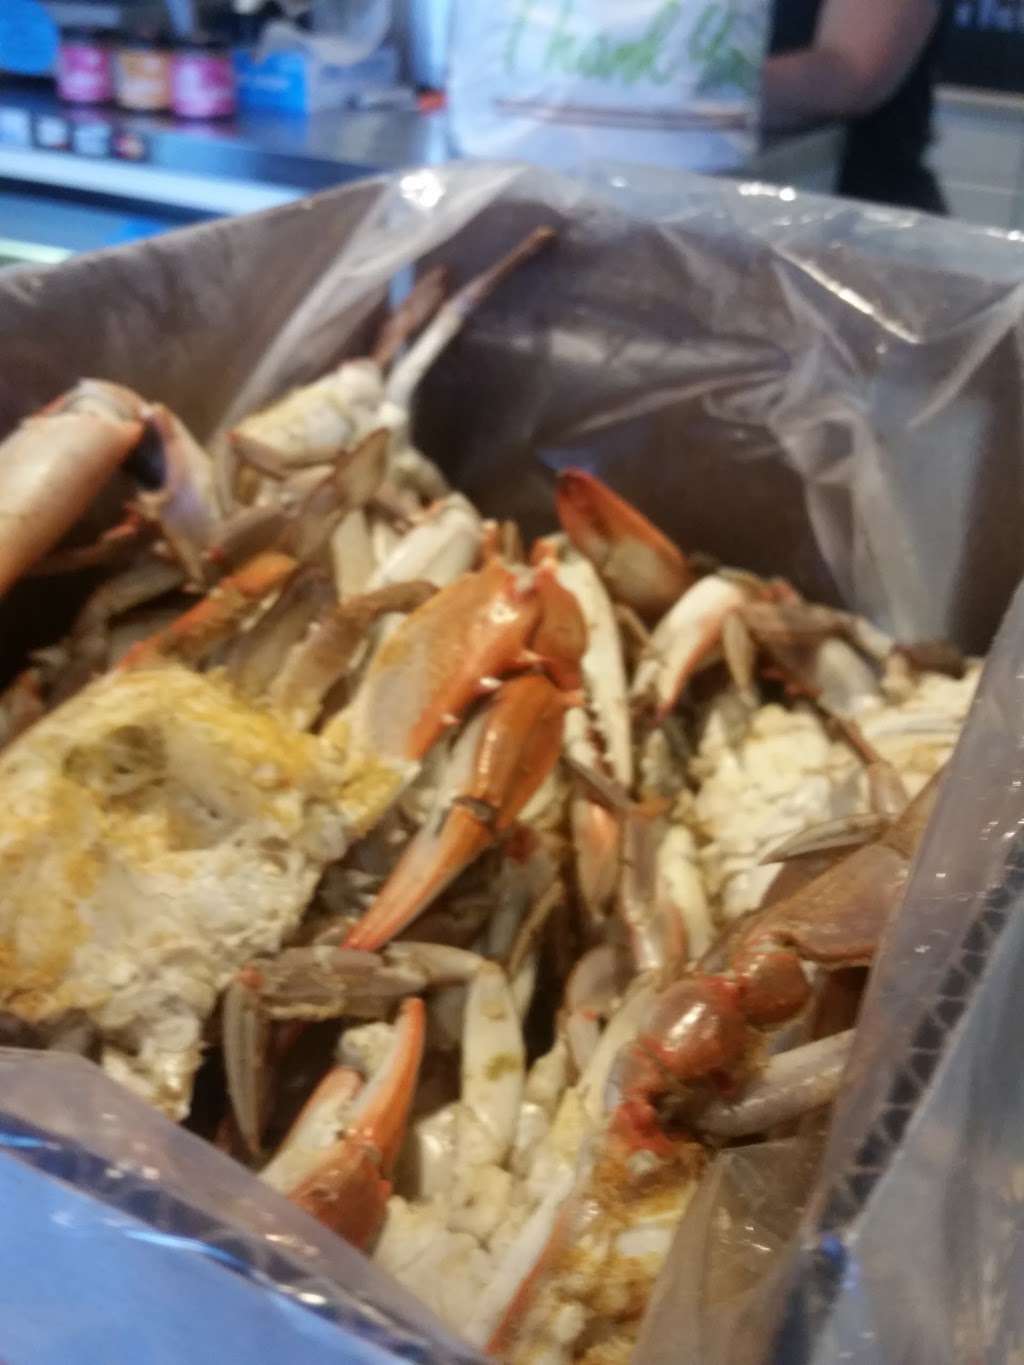 Shags Crab & Seafood | 9609, 1045 S Broadway, Pennsville, NJ 08070, USA | Phone: (856) 935-2826